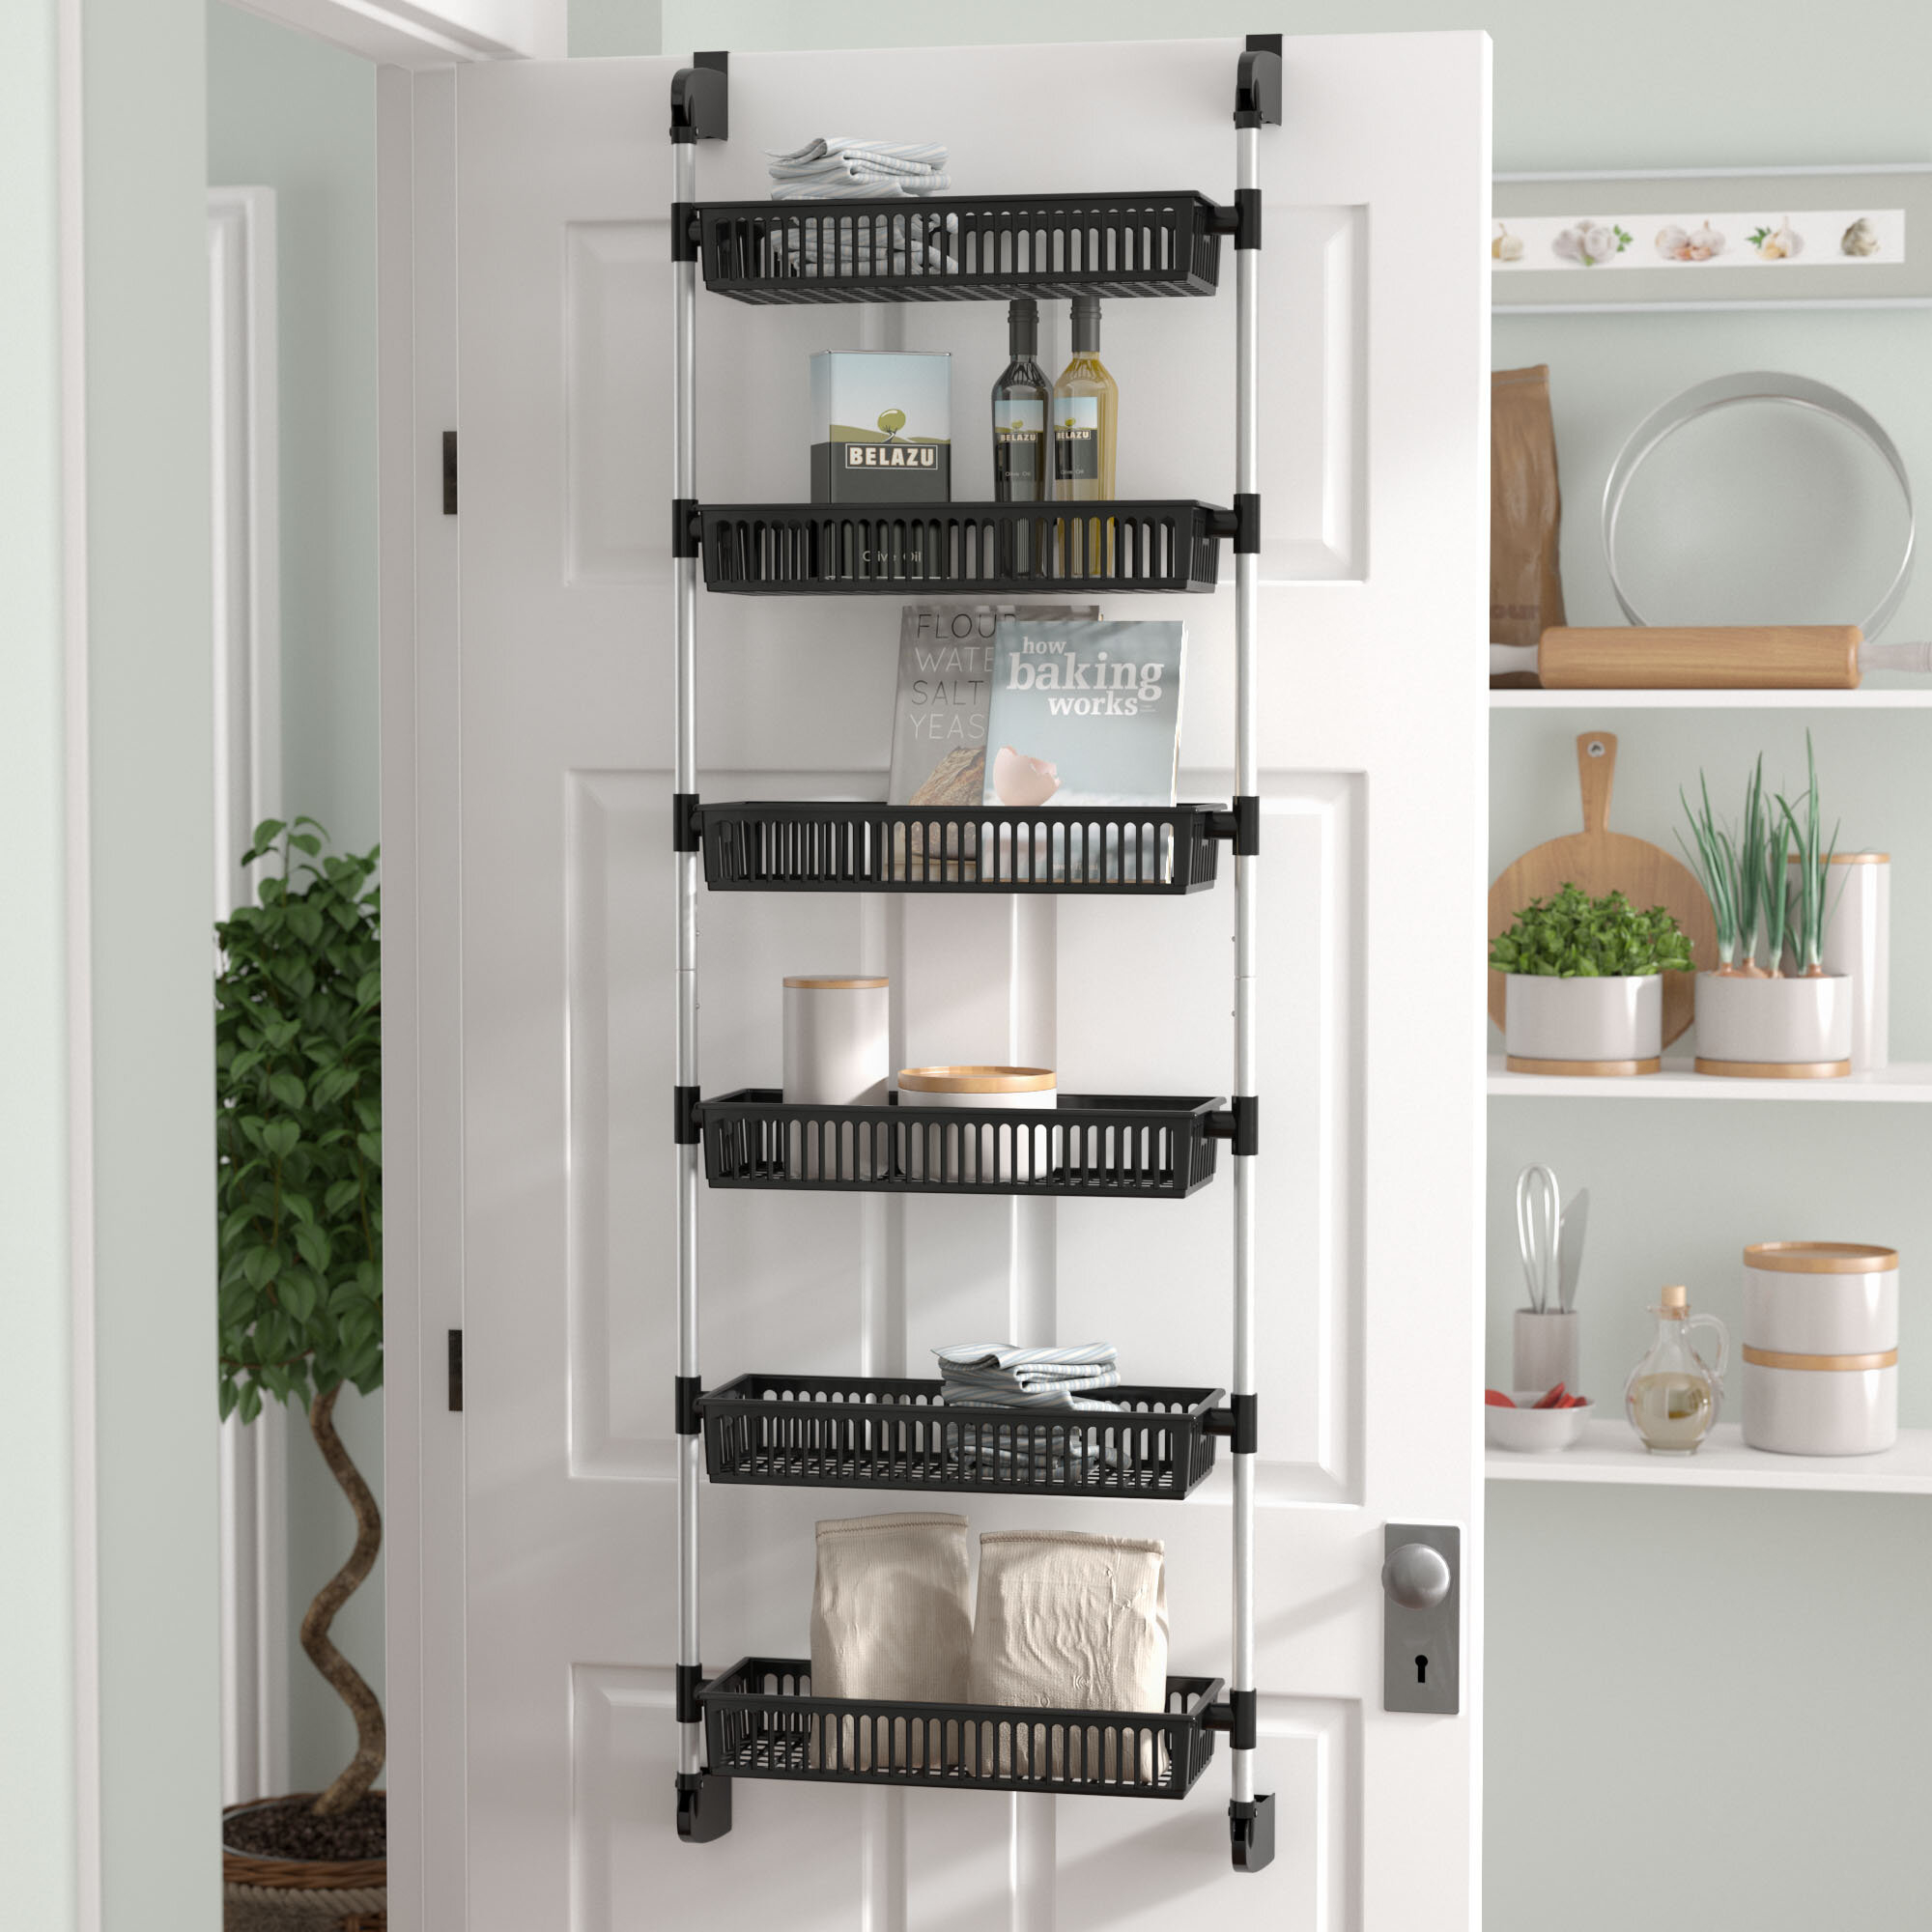 Steel Construction w/ Hooks & Screws Food Kitchen Smart Design Over The Door Adjustable Pantry Organizer Rack w/ 5 Adjustable Shelves White Misc Item for Cans Small 51 Inch 